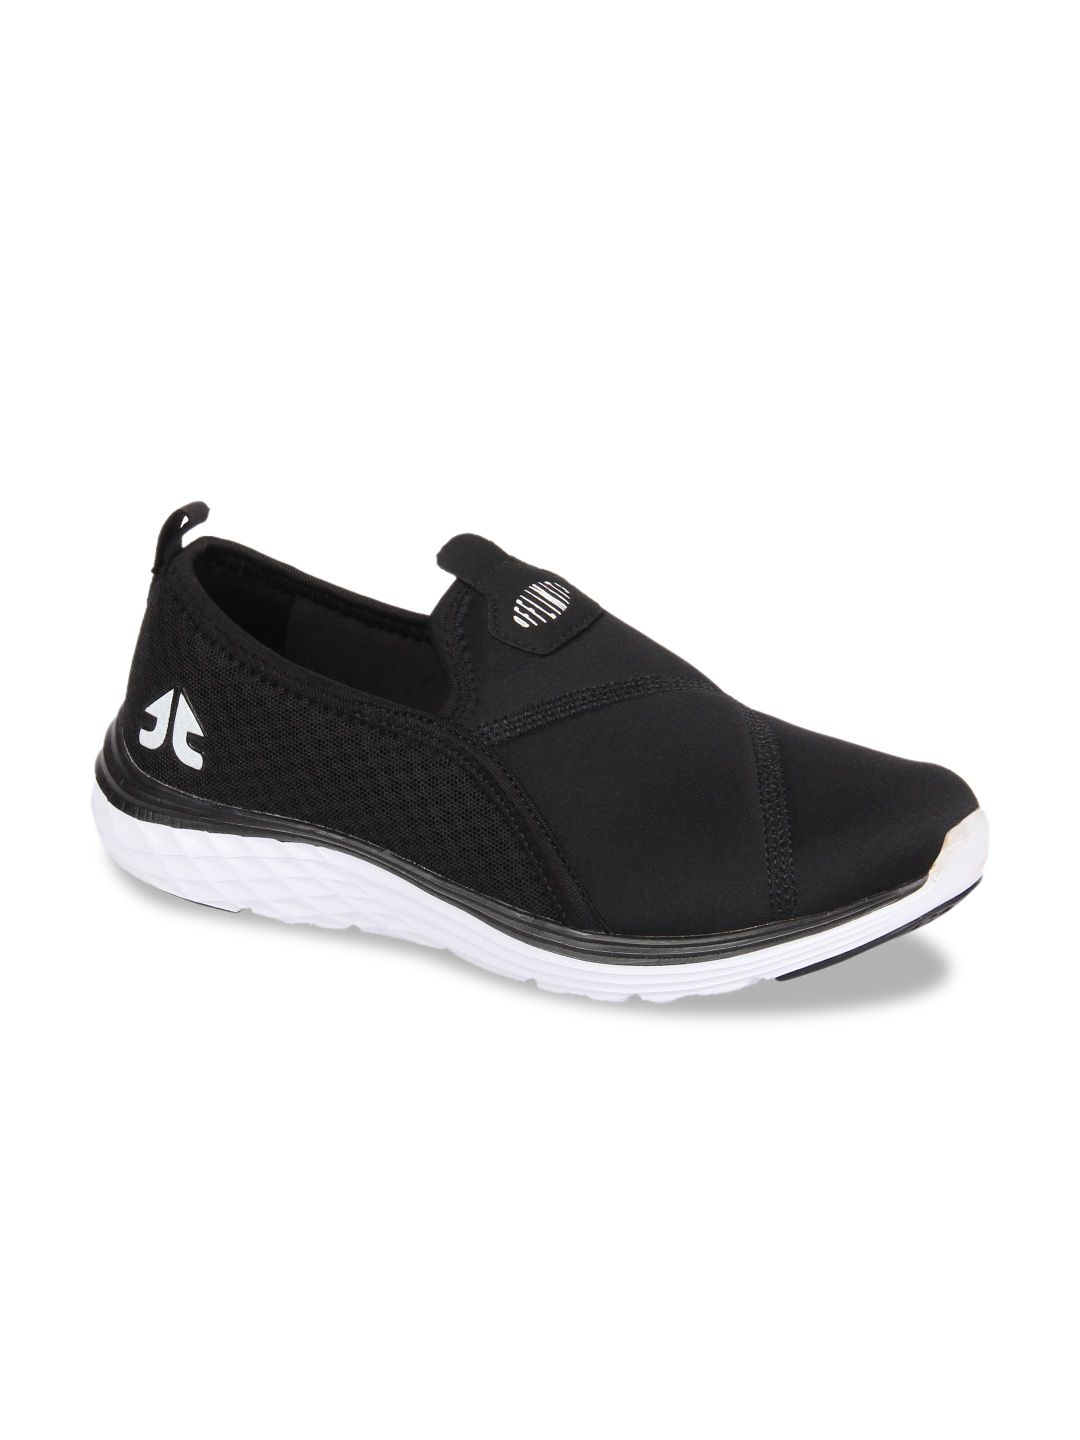 OFF LIMITS Women Black Mesh Mid-Top Walking Shoes Price in India